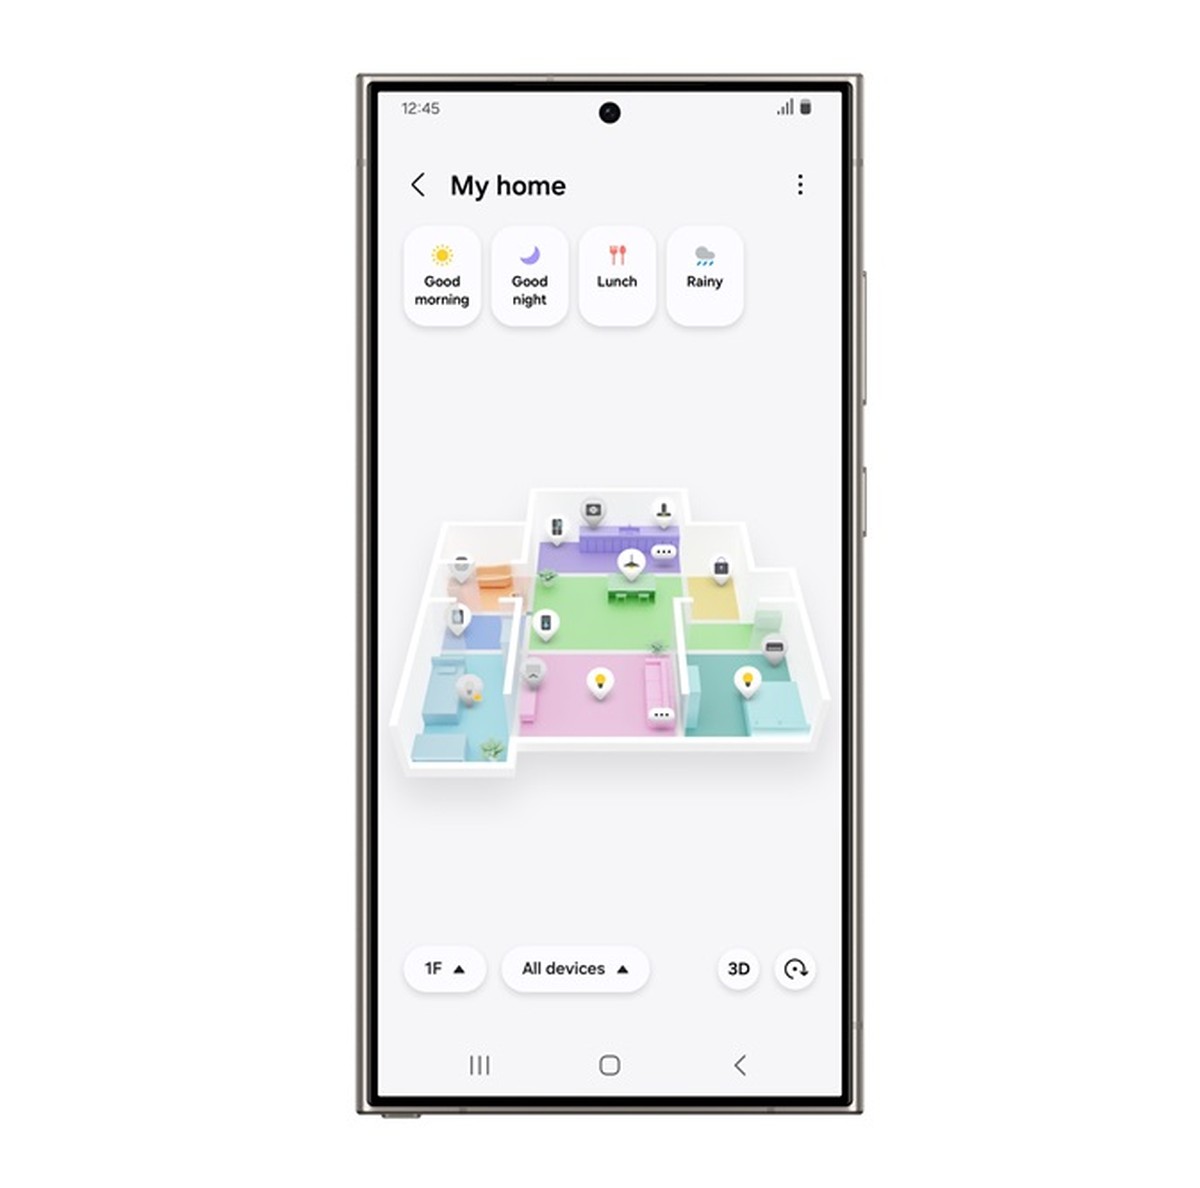 Samsung SmartThings widok mapy 3D